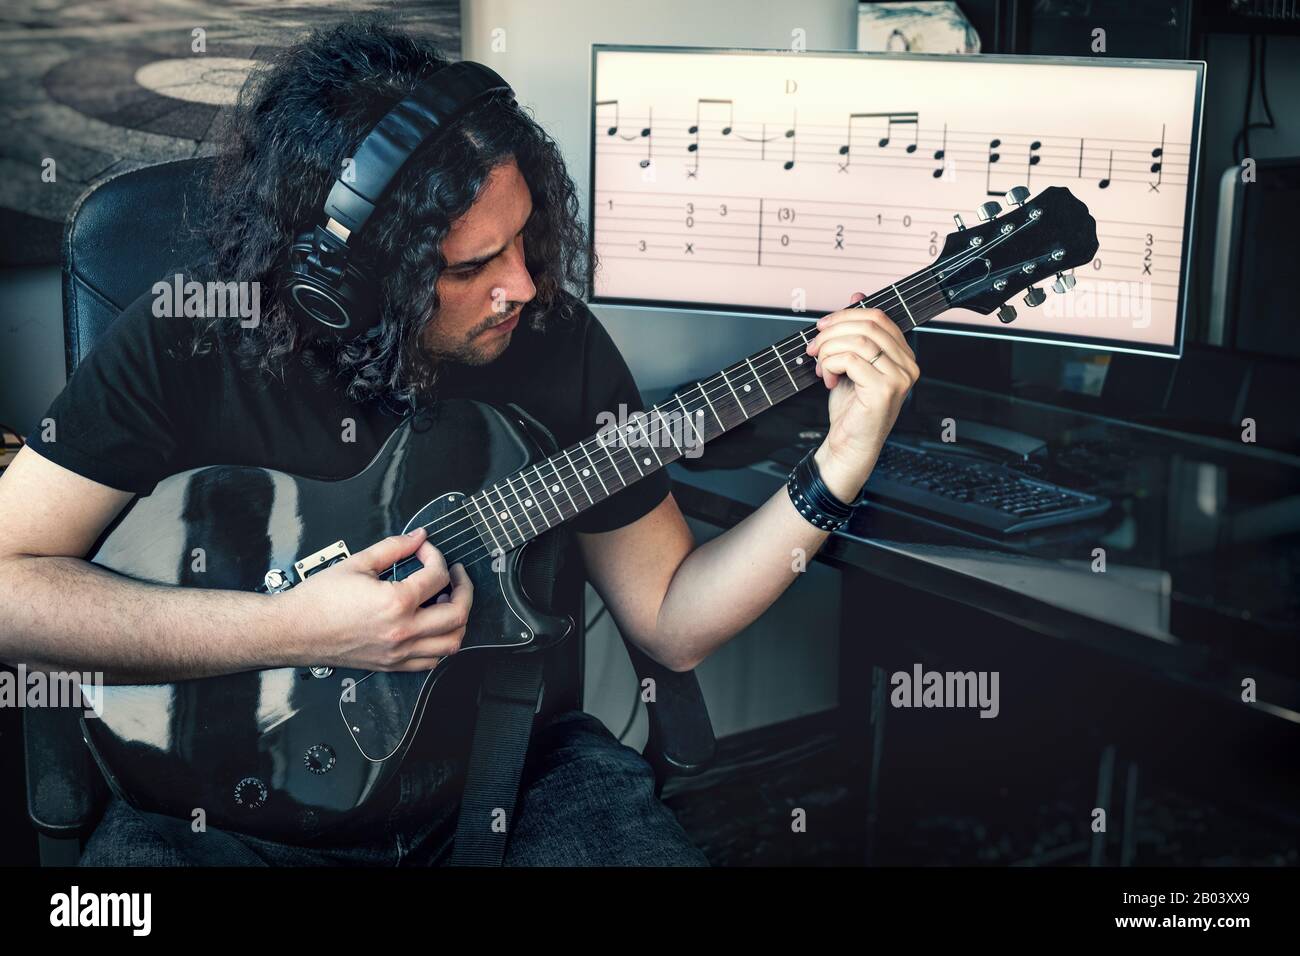 long haired rock composer musician man with headphones play electric guitar with musical score on screen background Stock Photo